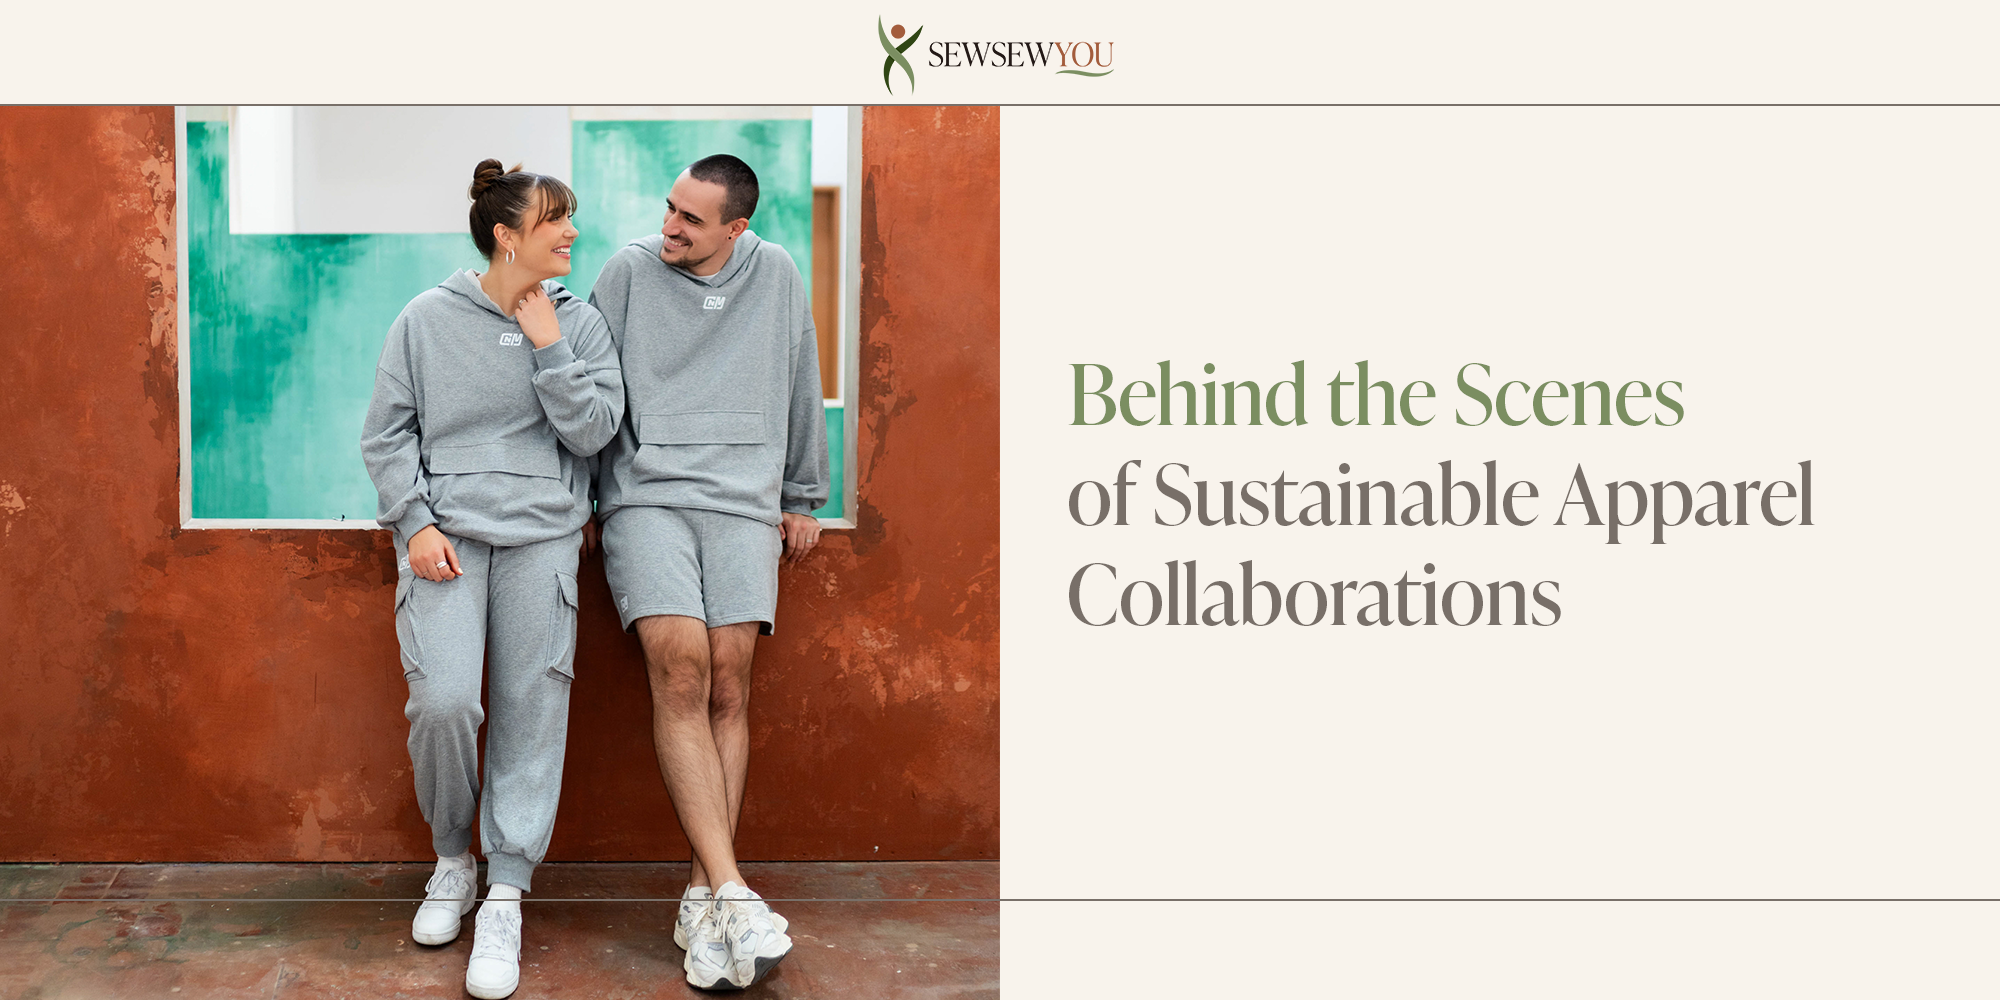 Behind the Scenes of Sustainable Apparel Collaborations